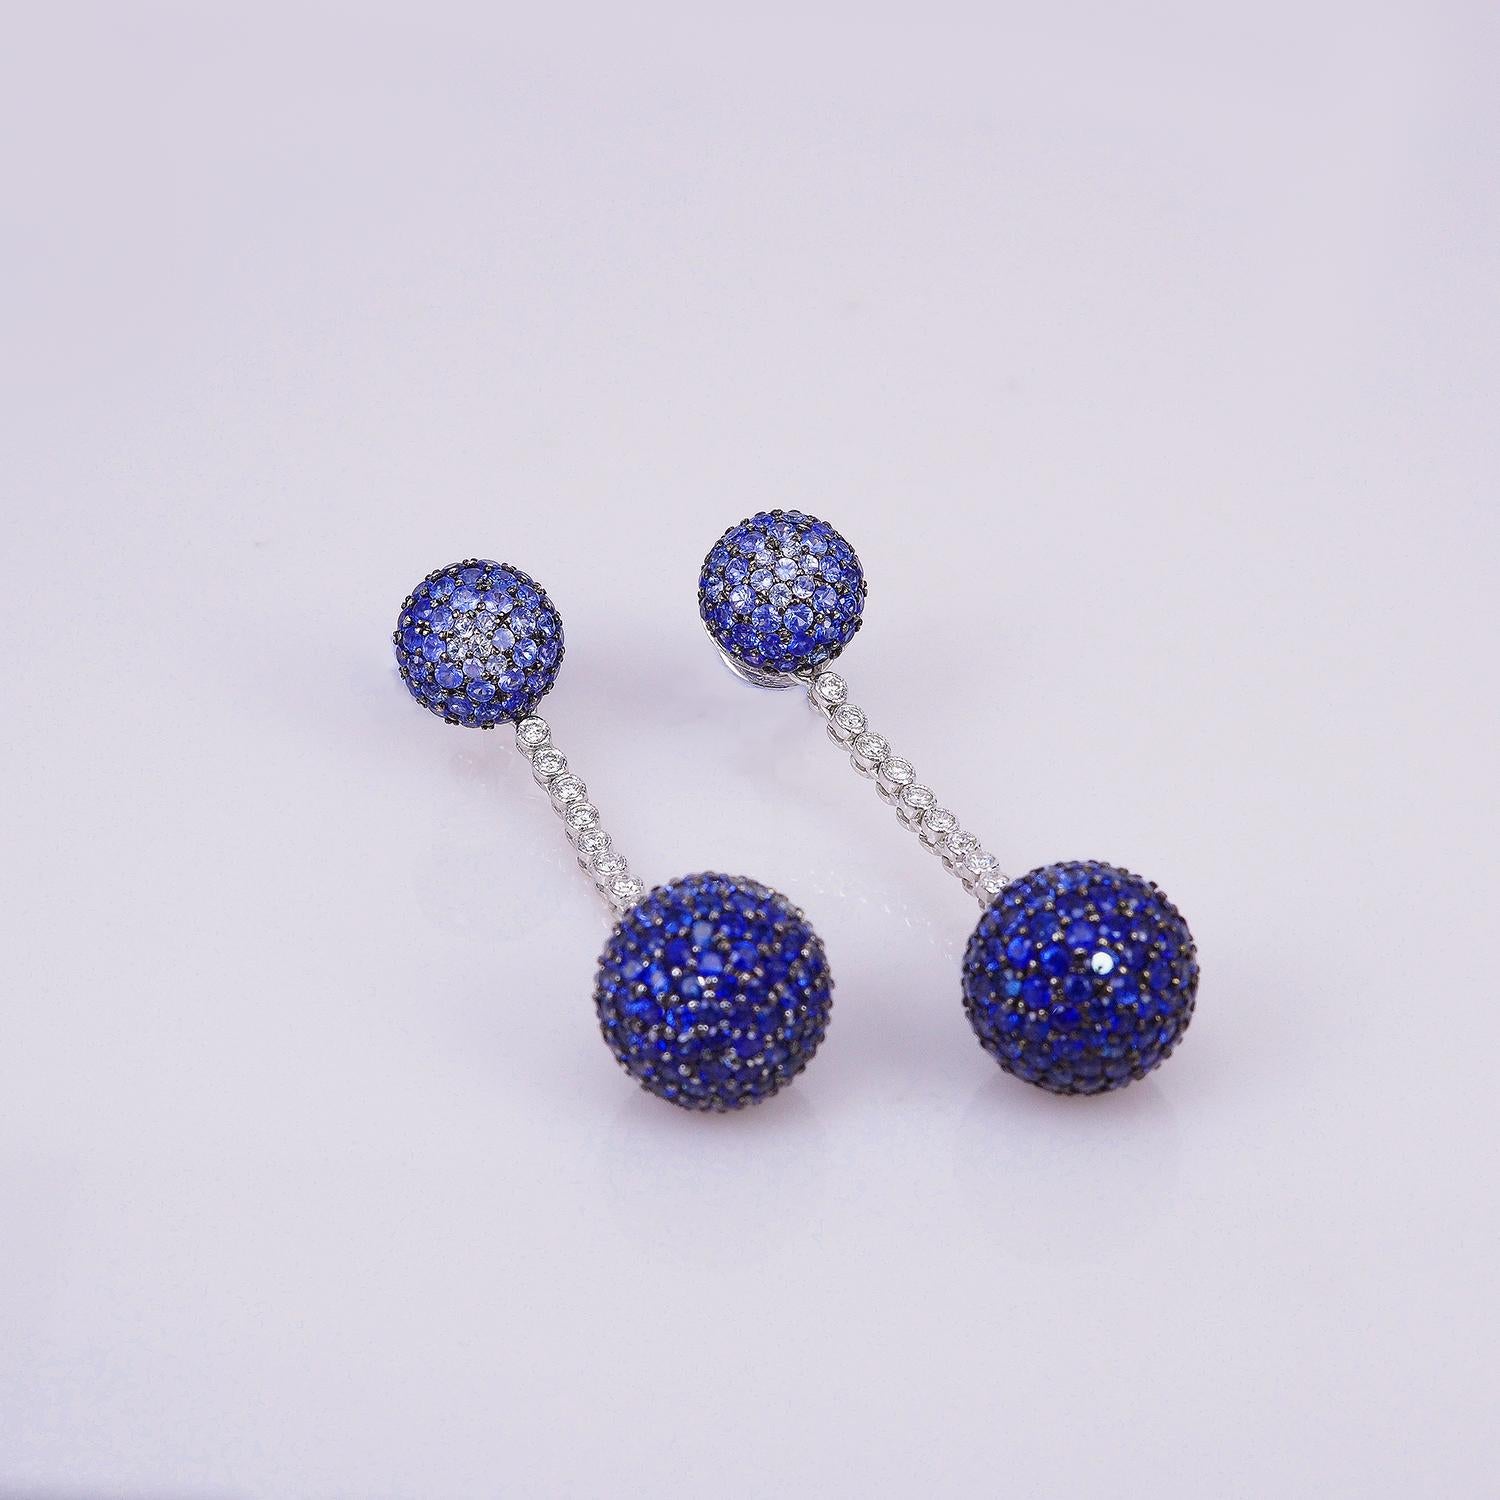 18 Karat White Gold Sapphire and Diamond Balls Earrings

2 Balls earrings made in 18k white Gold.It make in modern style .We shaded color of sapphire to show the powerful of color.This earrings can detachable so you can wear alone ball for day time